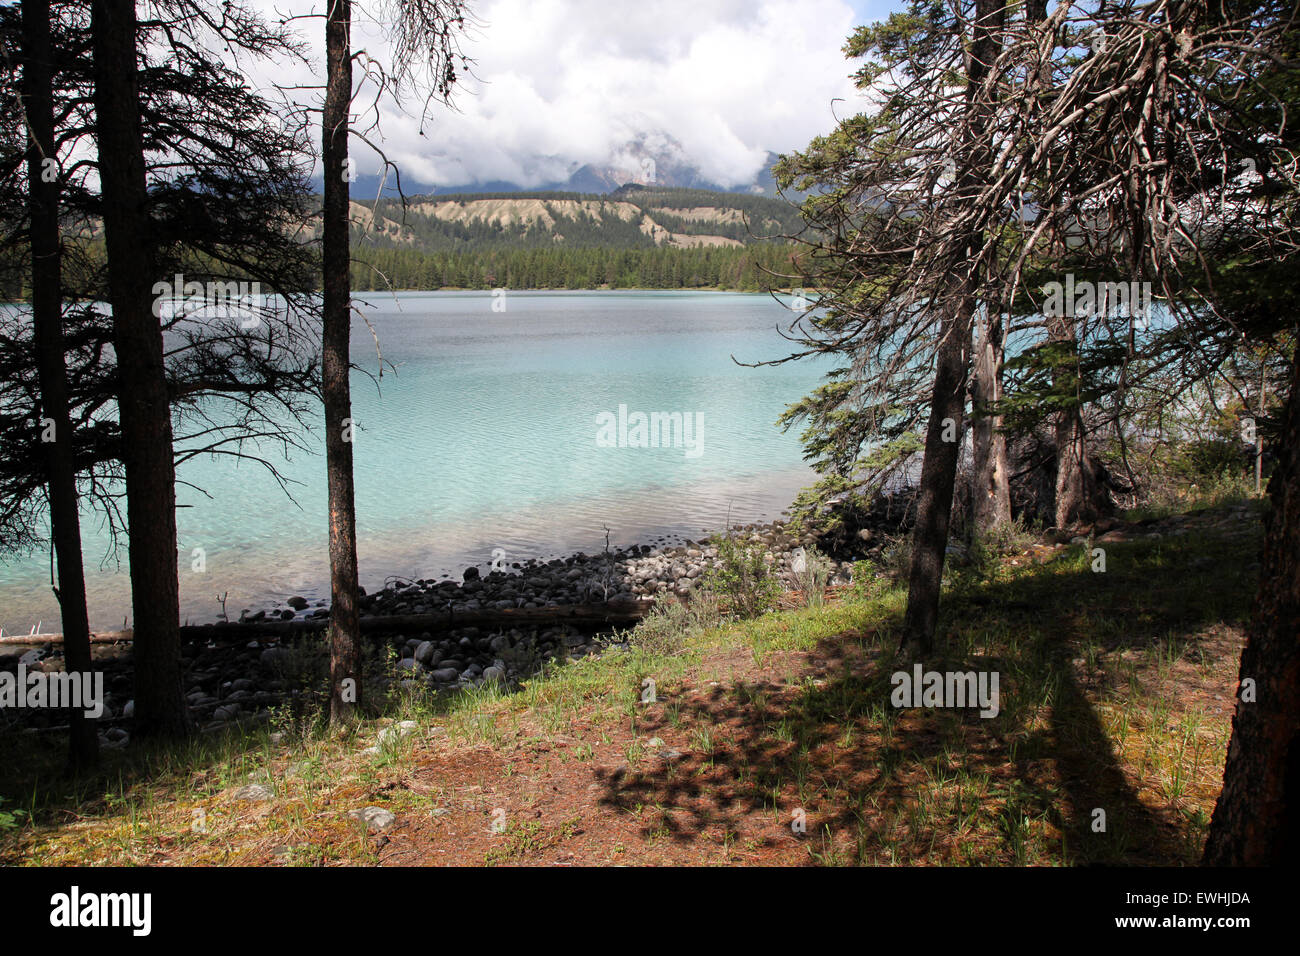 A peaceful scene in the Rockies showing a lake in the foreground and the mountains behind Stock Photo